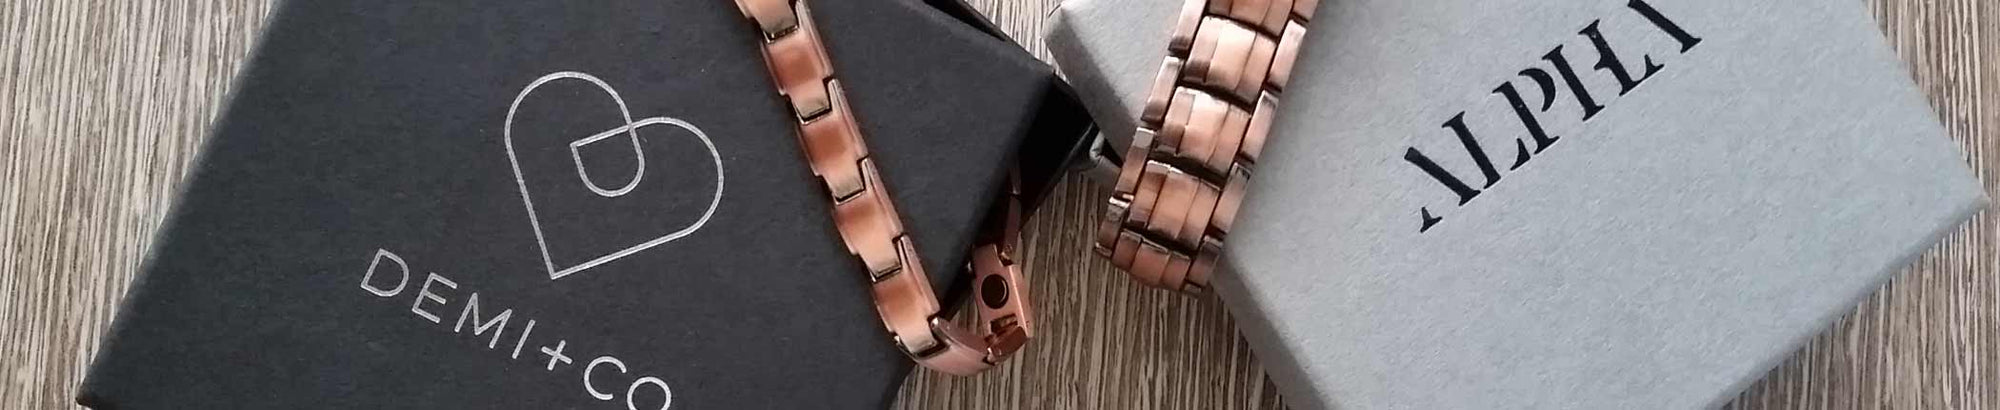 Copper bracelet; Pros and cons